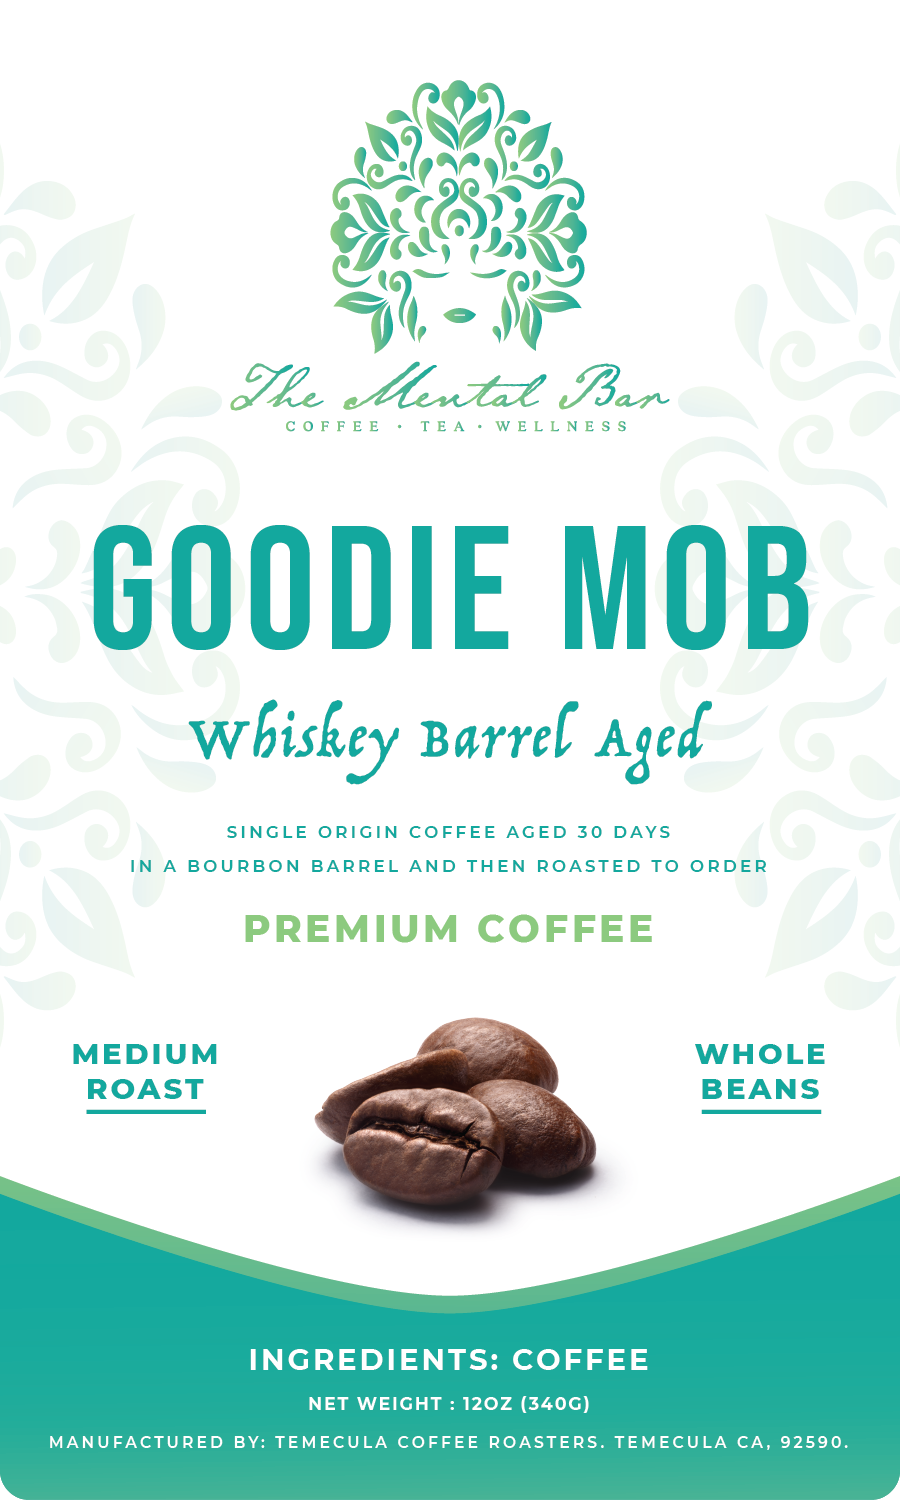 Goodie mob (Whiskey Barrel Aged) - The Mental Bar